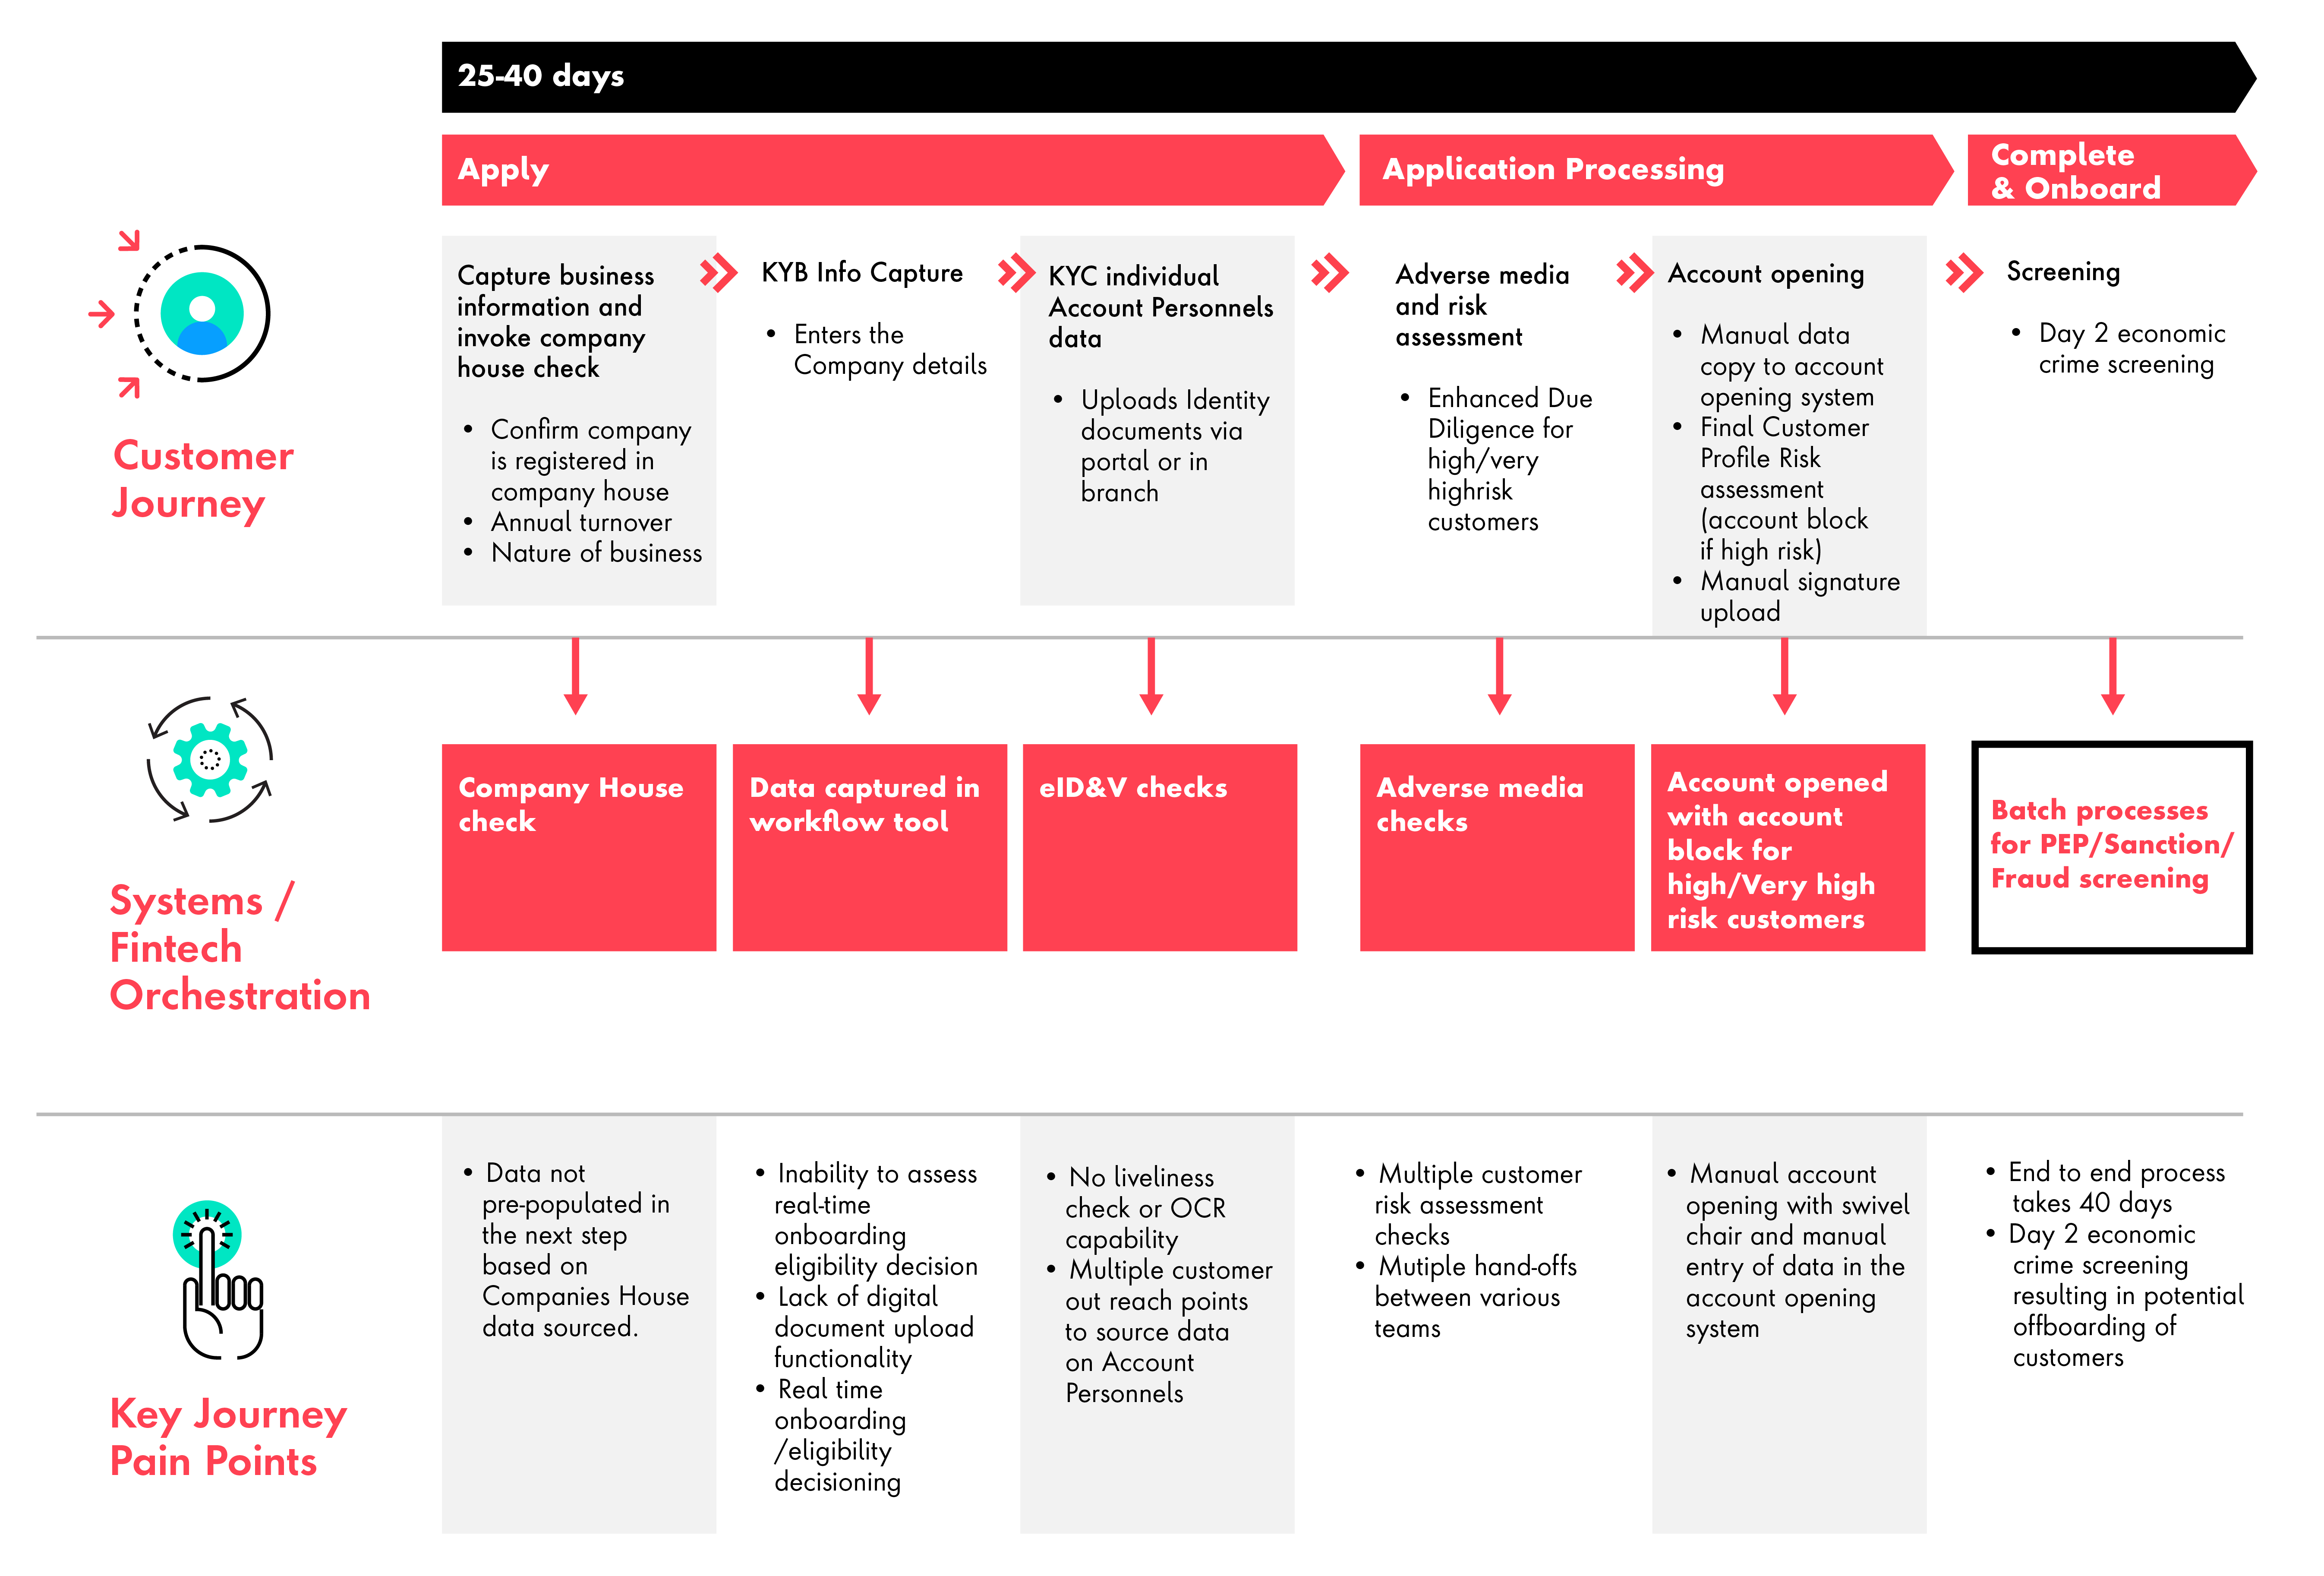 This is how a typical incumbent bank onboarding journey operates